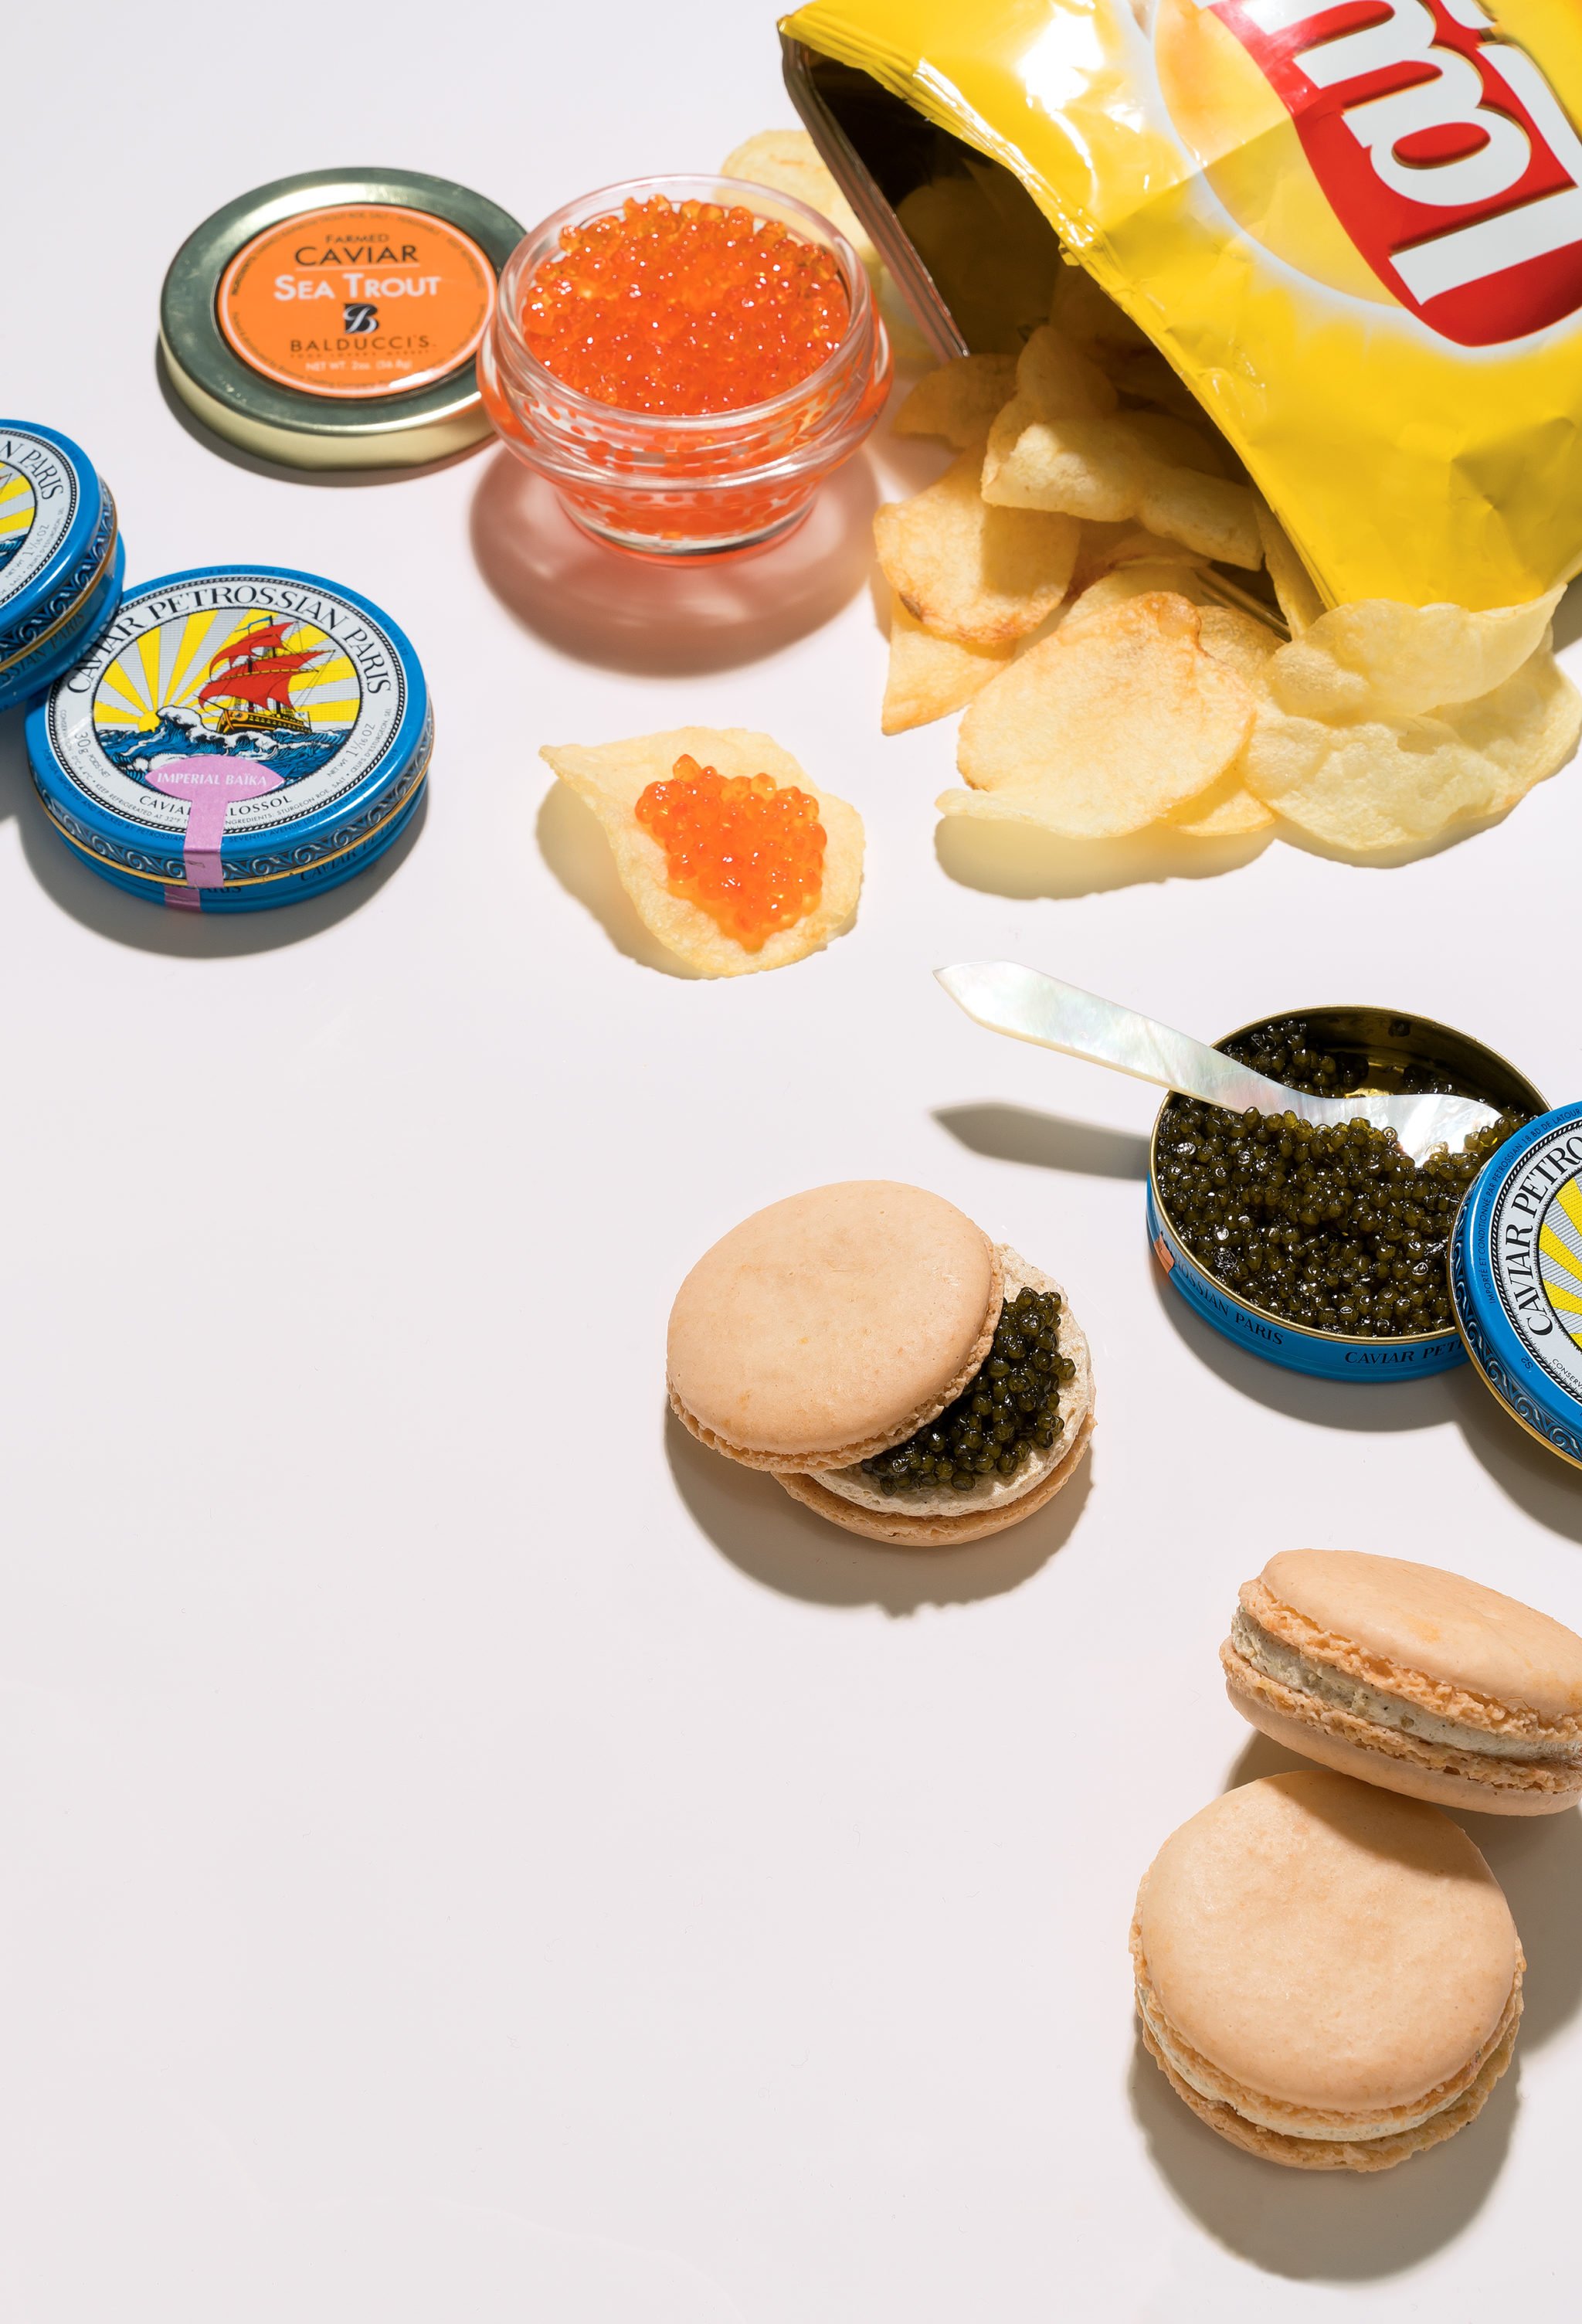 Caviar is having a moment–but with a fun twist. Photograph by Scott Suchman.